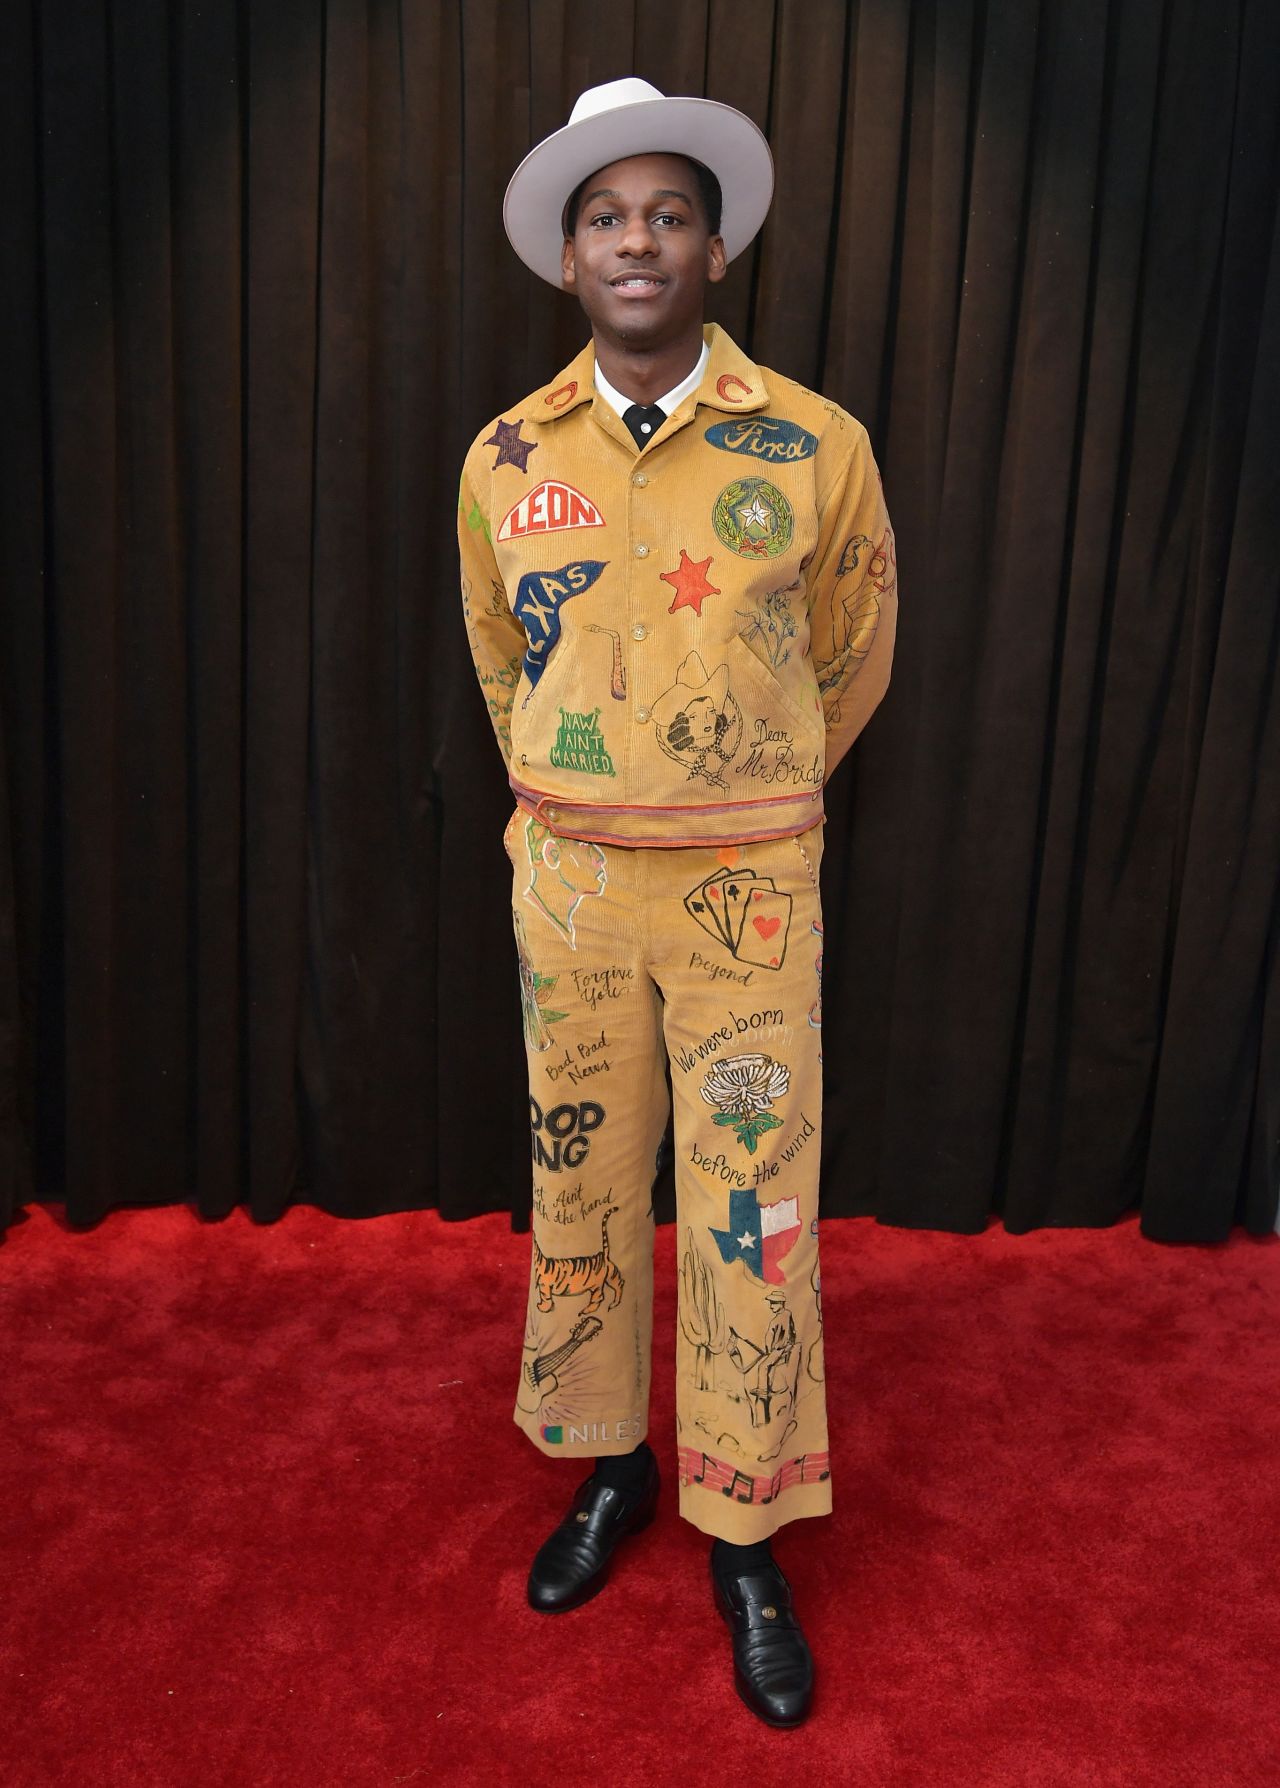 Singer Leon Bridges wore a mustard-colored custom suit by Emily Bode. His outfit was covered in illustrations representing his home state of Texas and his most recent album, "Good Thing."